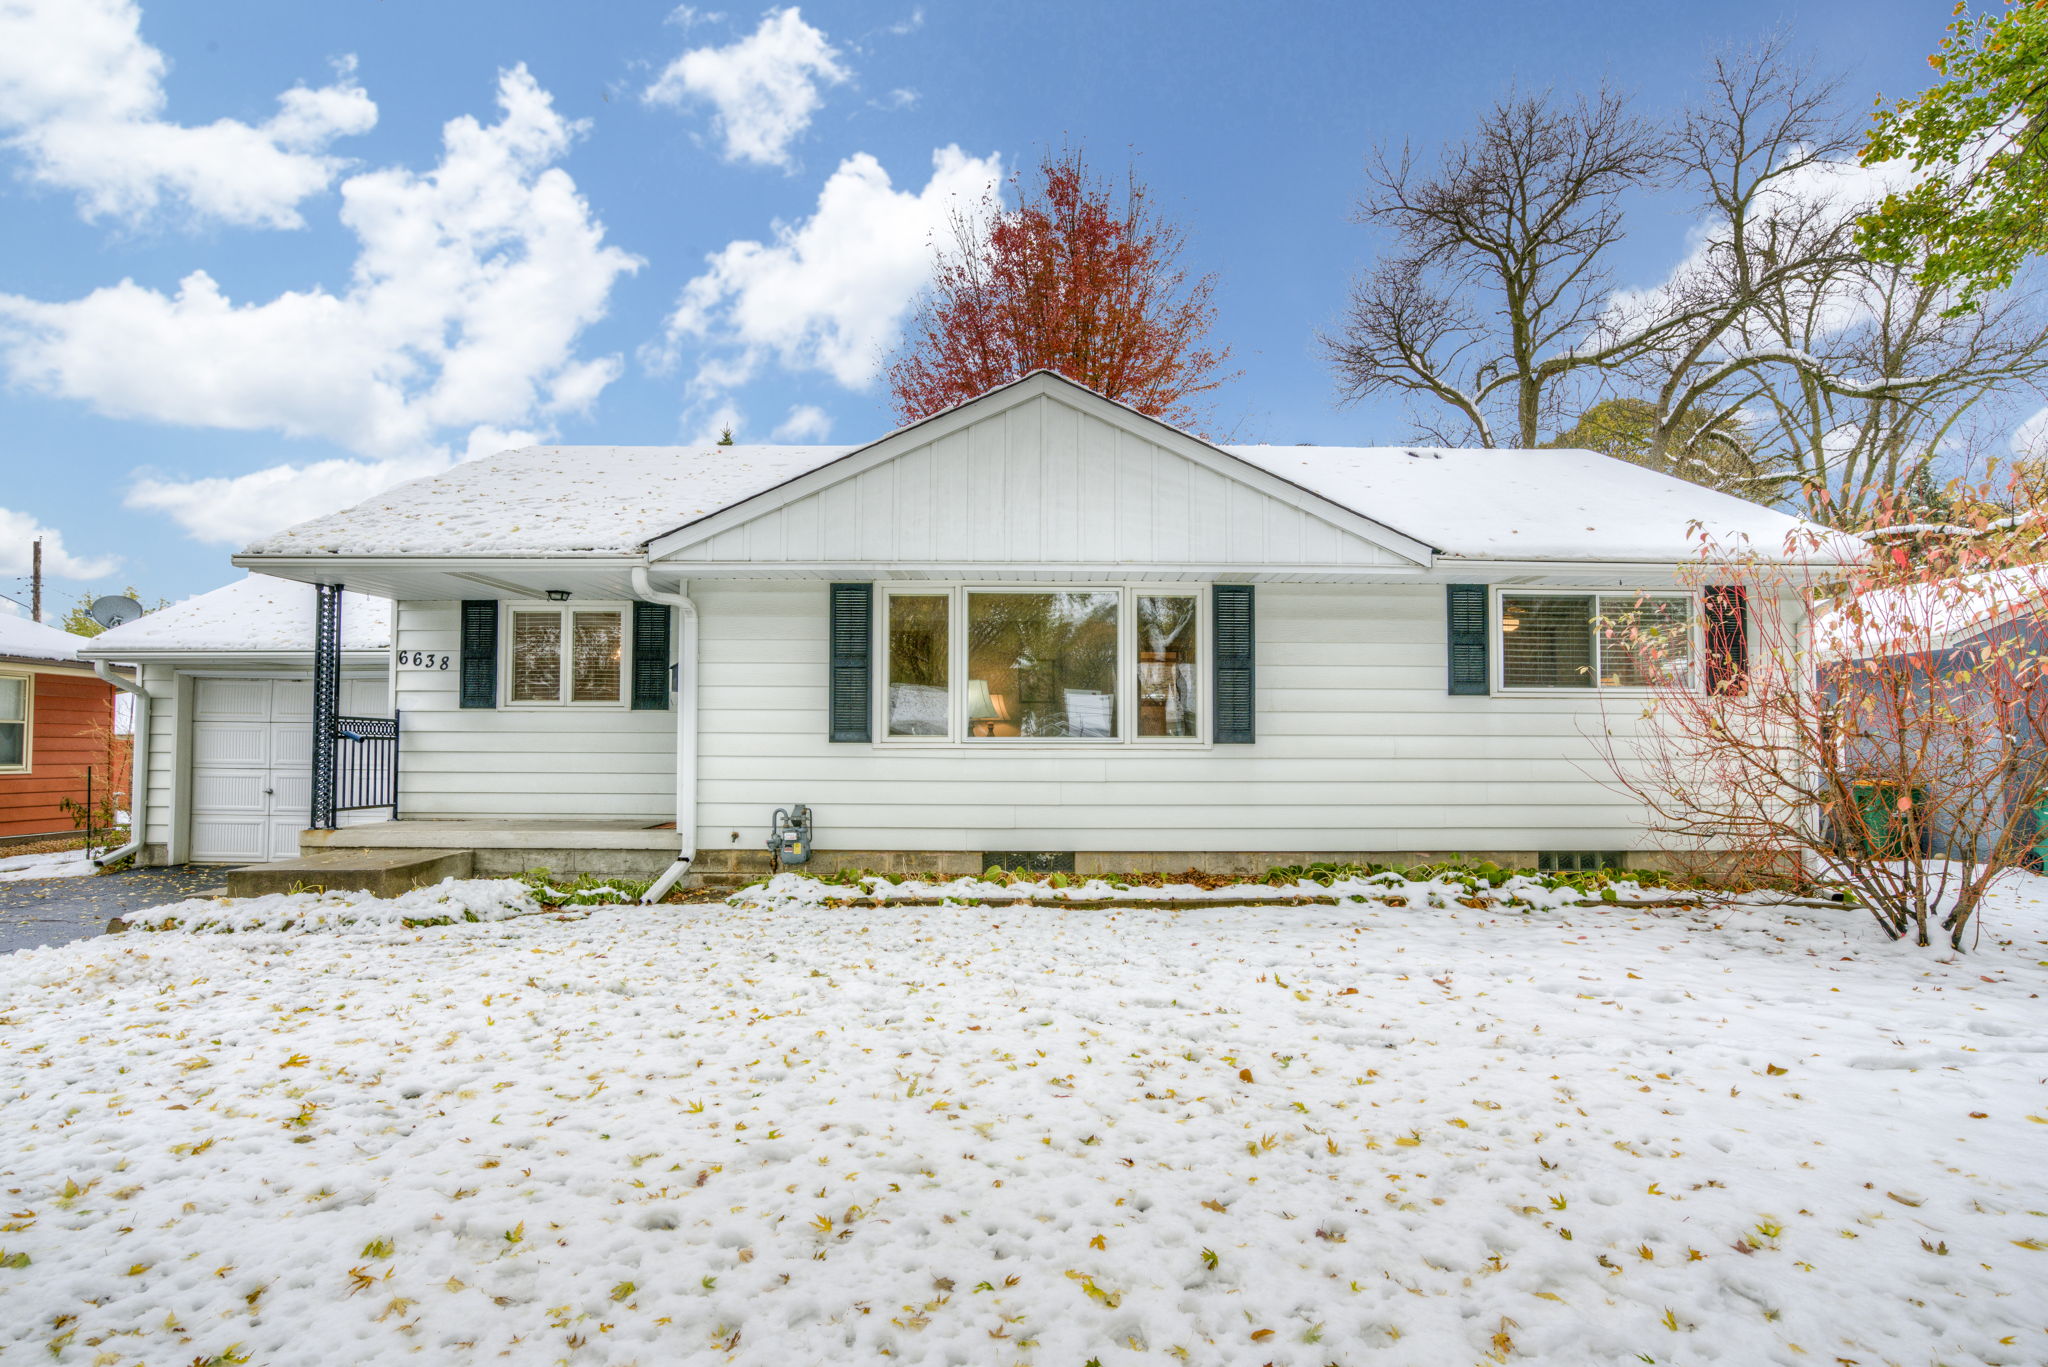  6638 S 15th Ave, Richfield, MN 55423, US